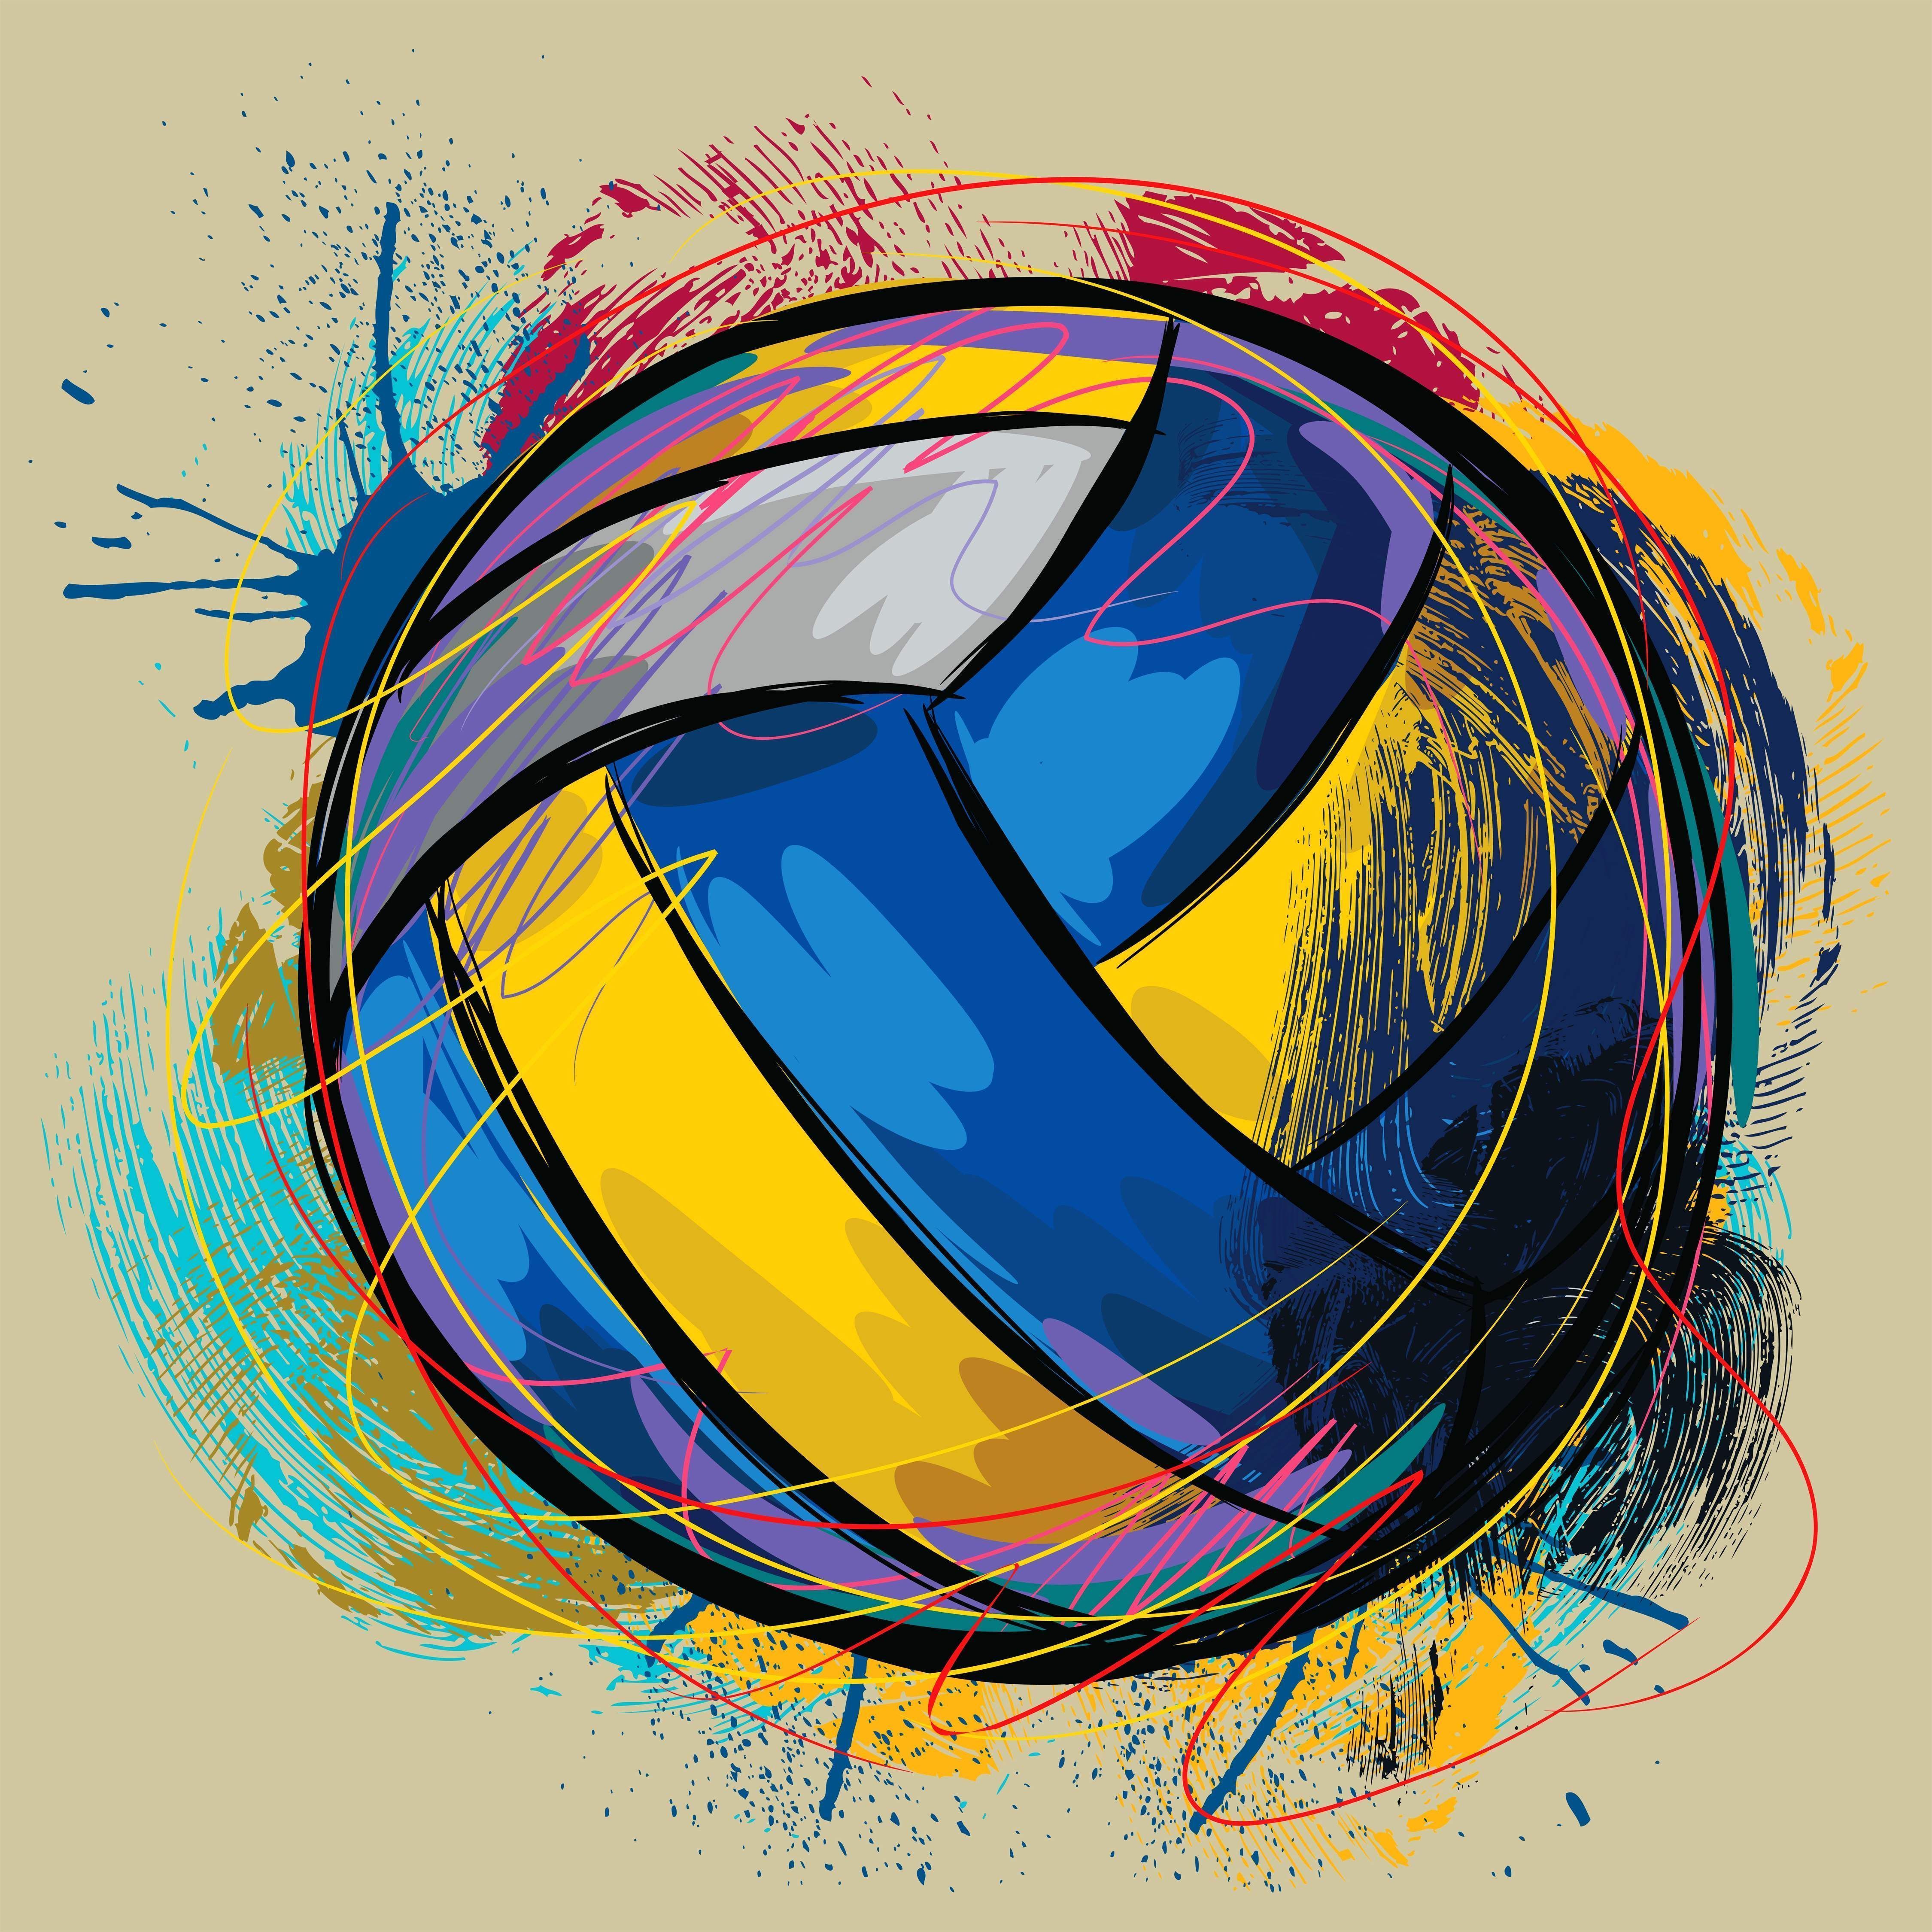 A volleyball in blue, yellow, and white, with a colorful paint splatter design around it. - Volleyball